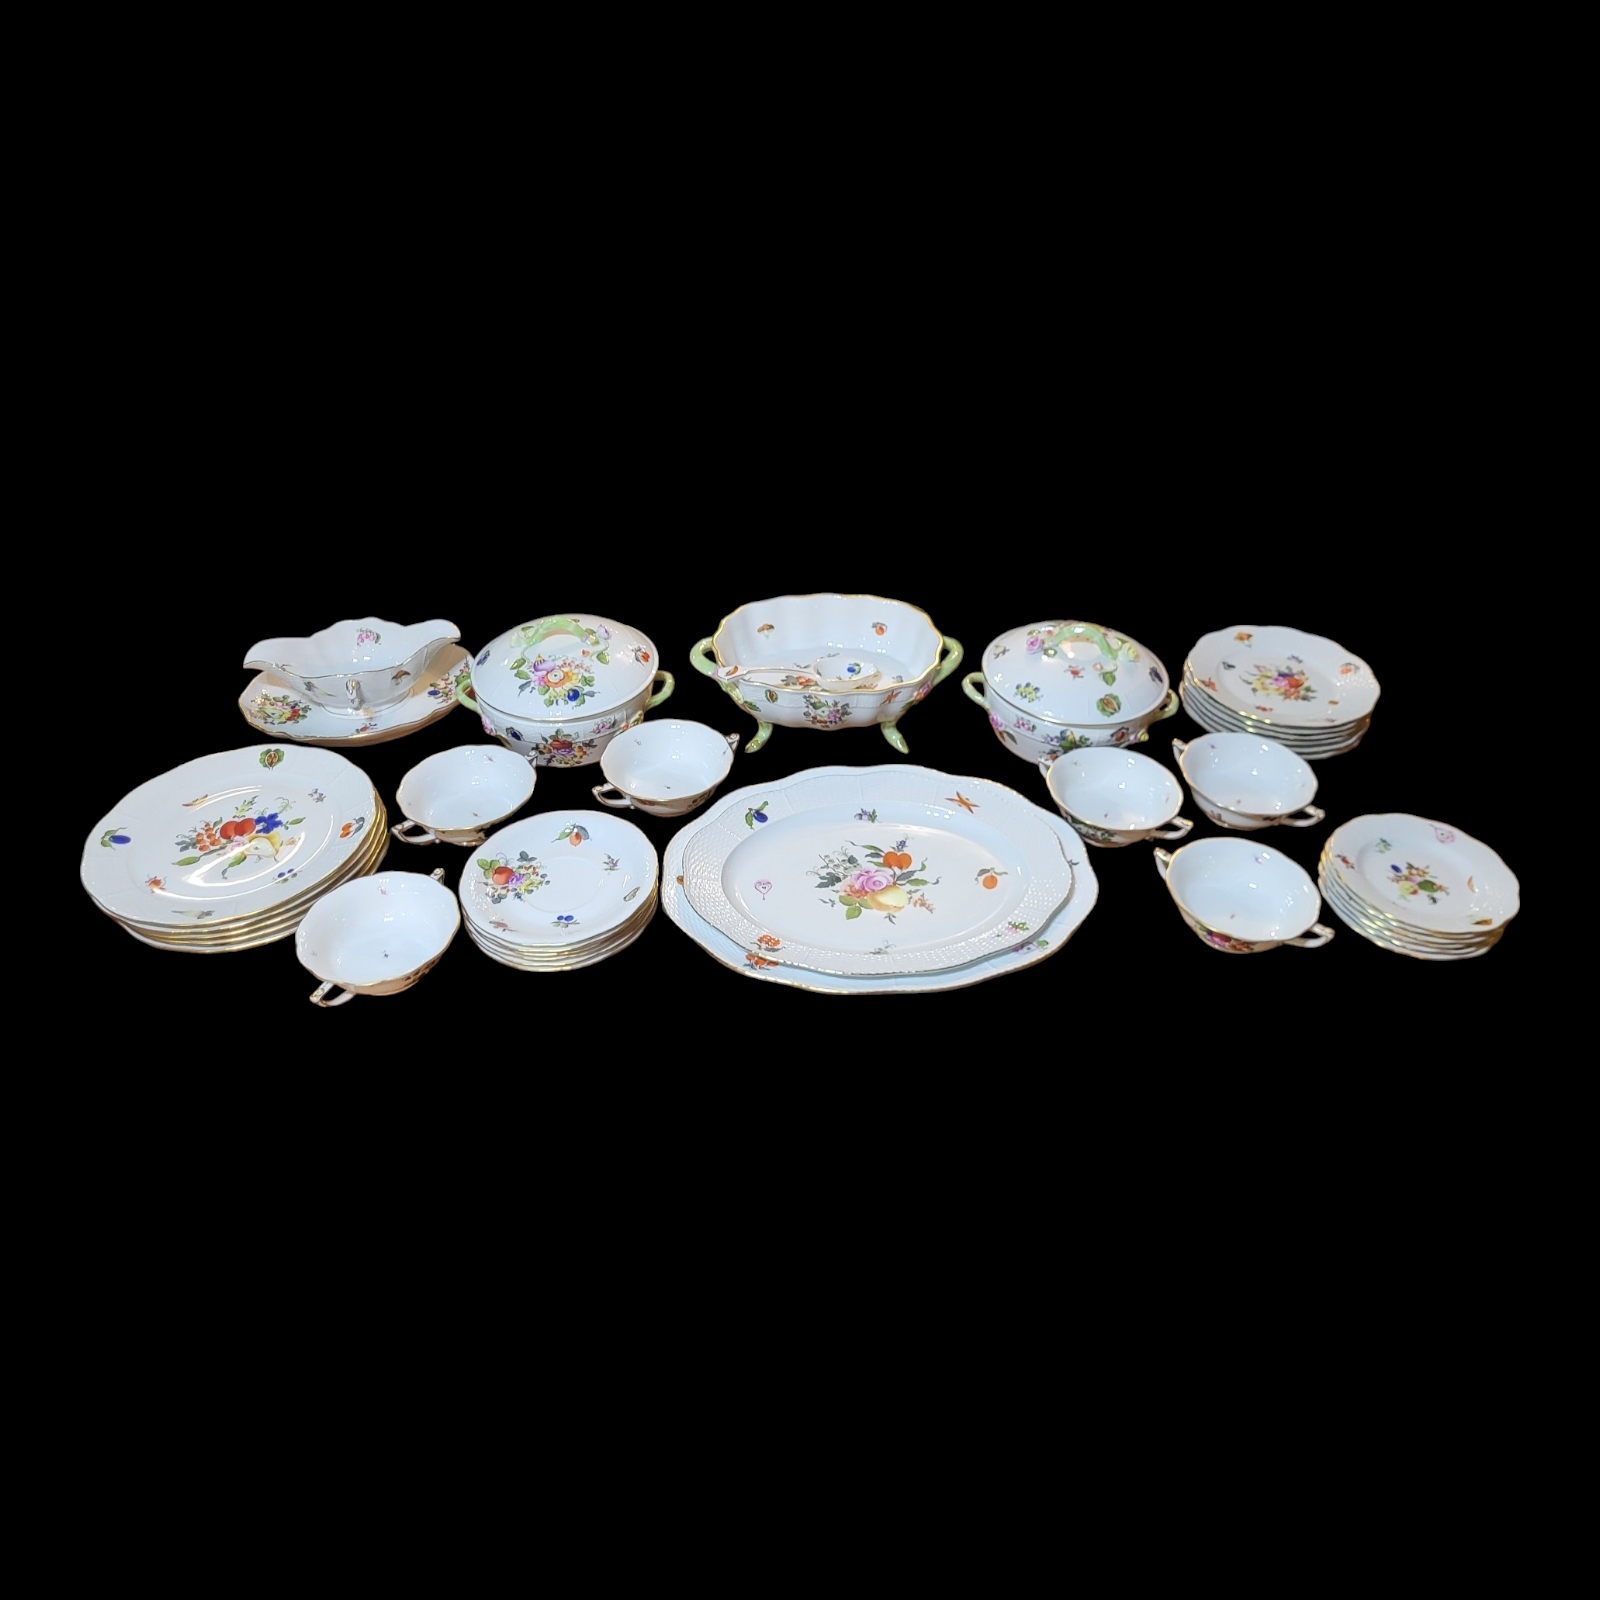 HEREND, A 20TH CENTURY HARD PORCELAIN DINNER SERVICE, CIRCA 1930 Comprising thirty-six pieces in - Image 2 of 11